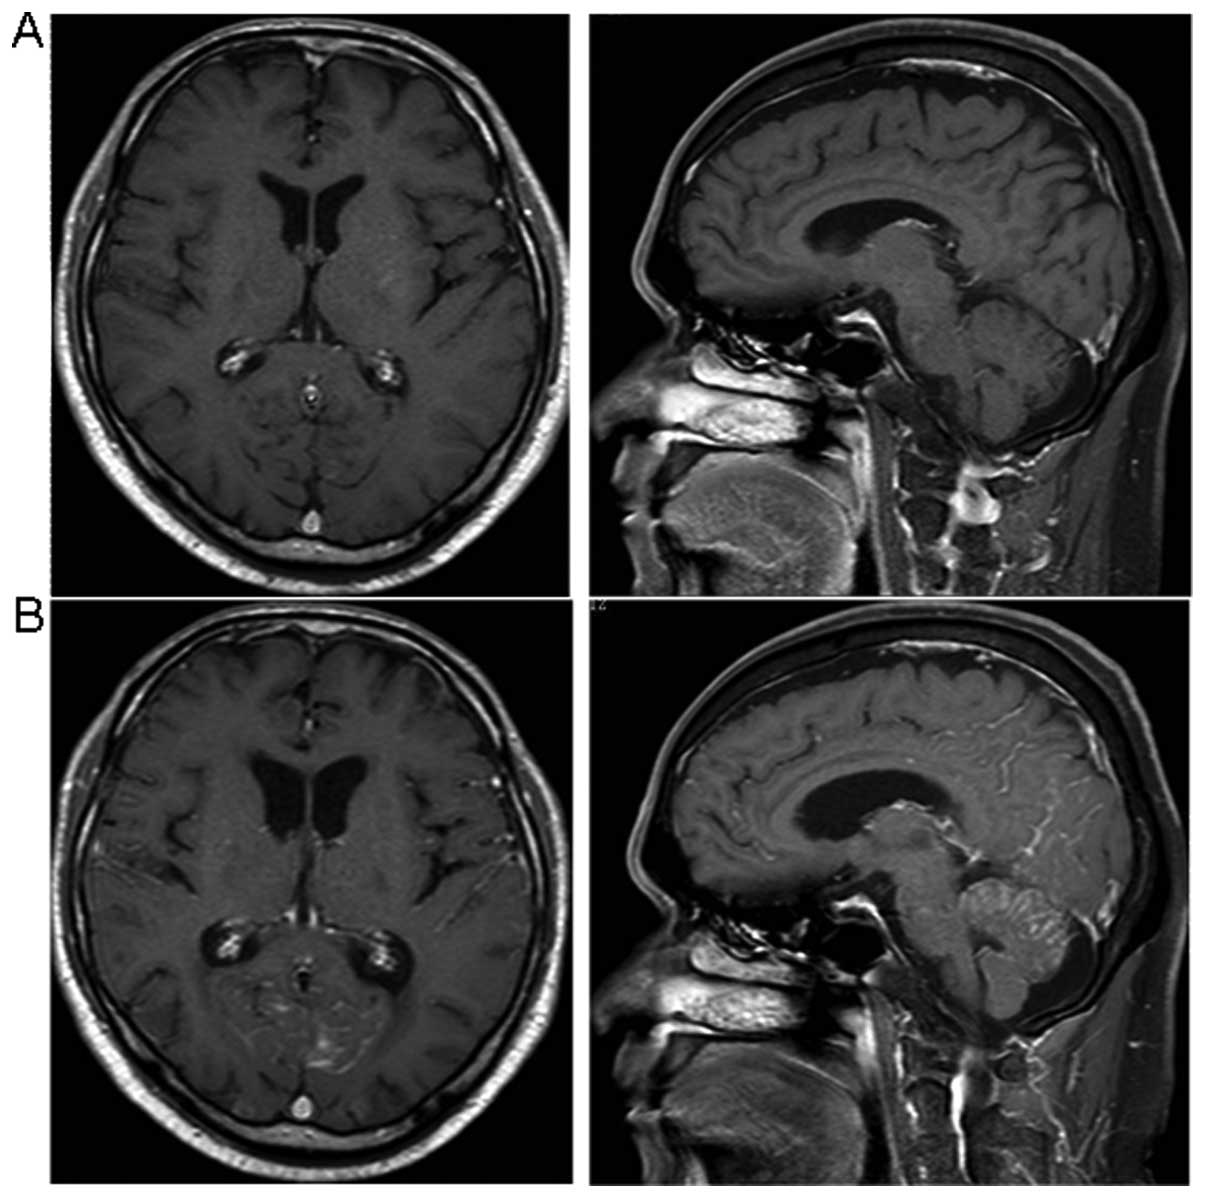 Figure 2 Referencing PMID 27017242, Sanctuary Site Leptomeningeal Metastases in HER-2 Positive Breast Cancer: A Review in the